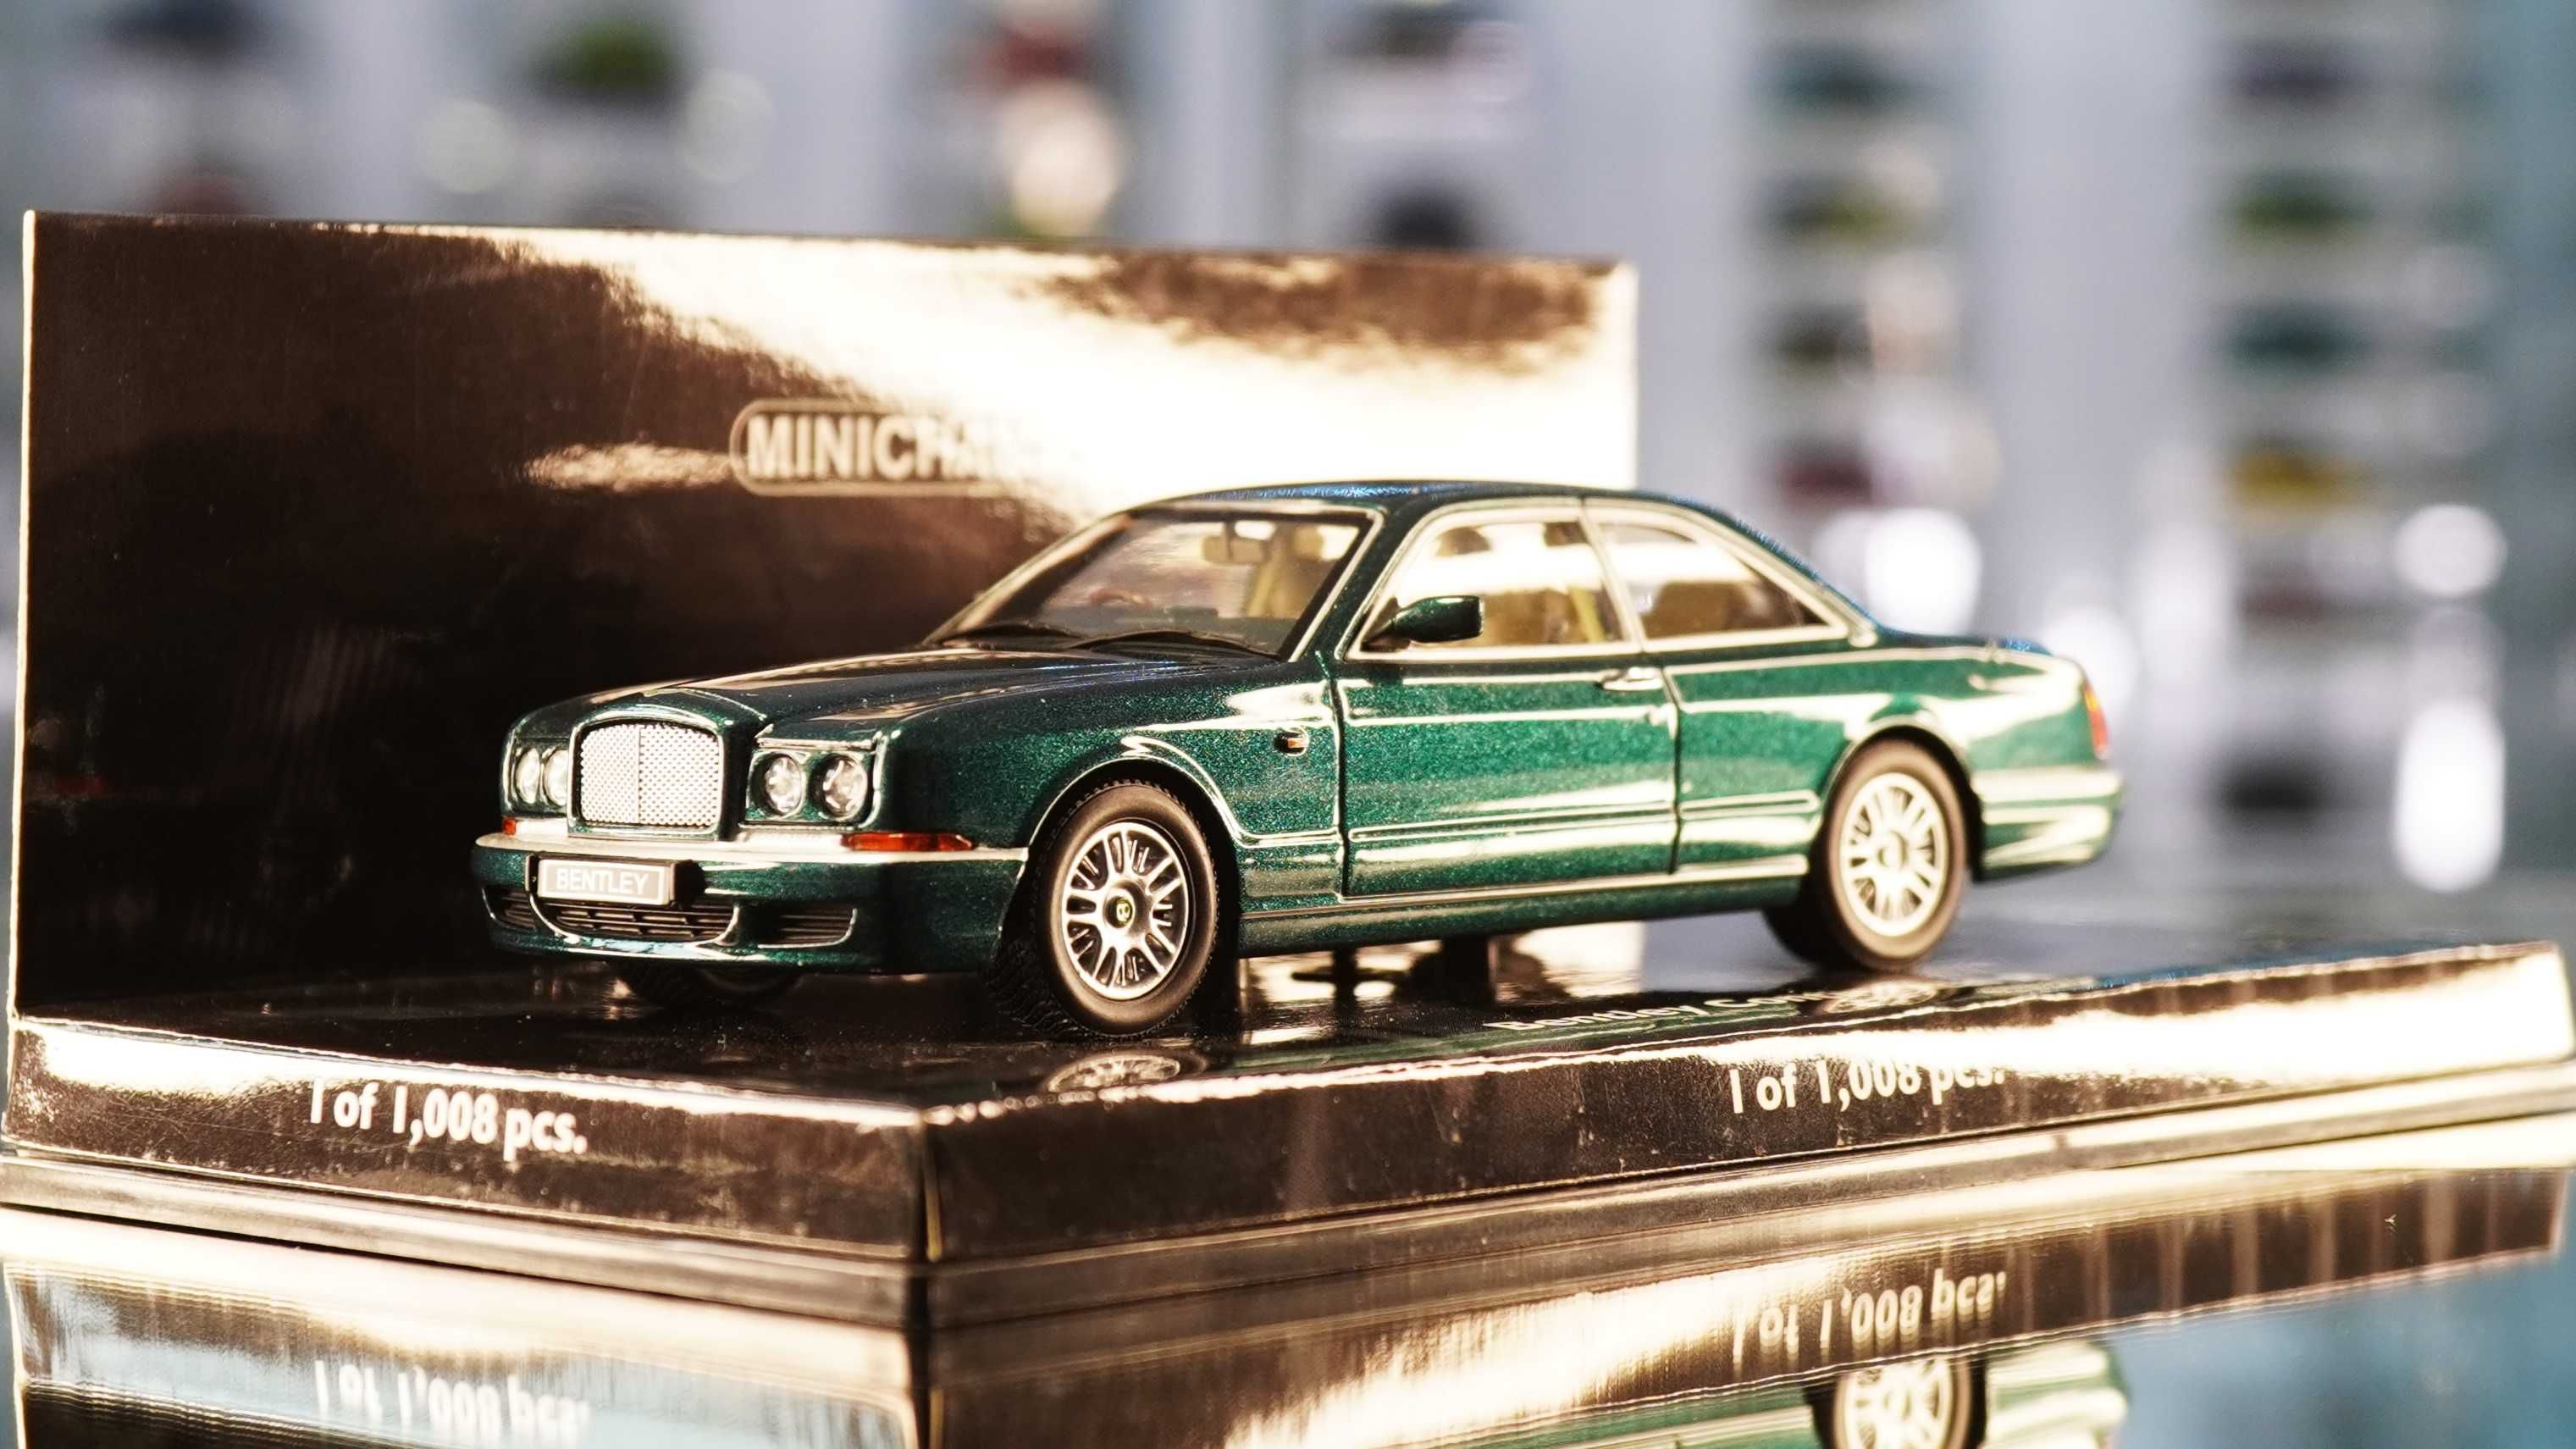 1995 Bentley Continental R coupe - Minichamps 1/43